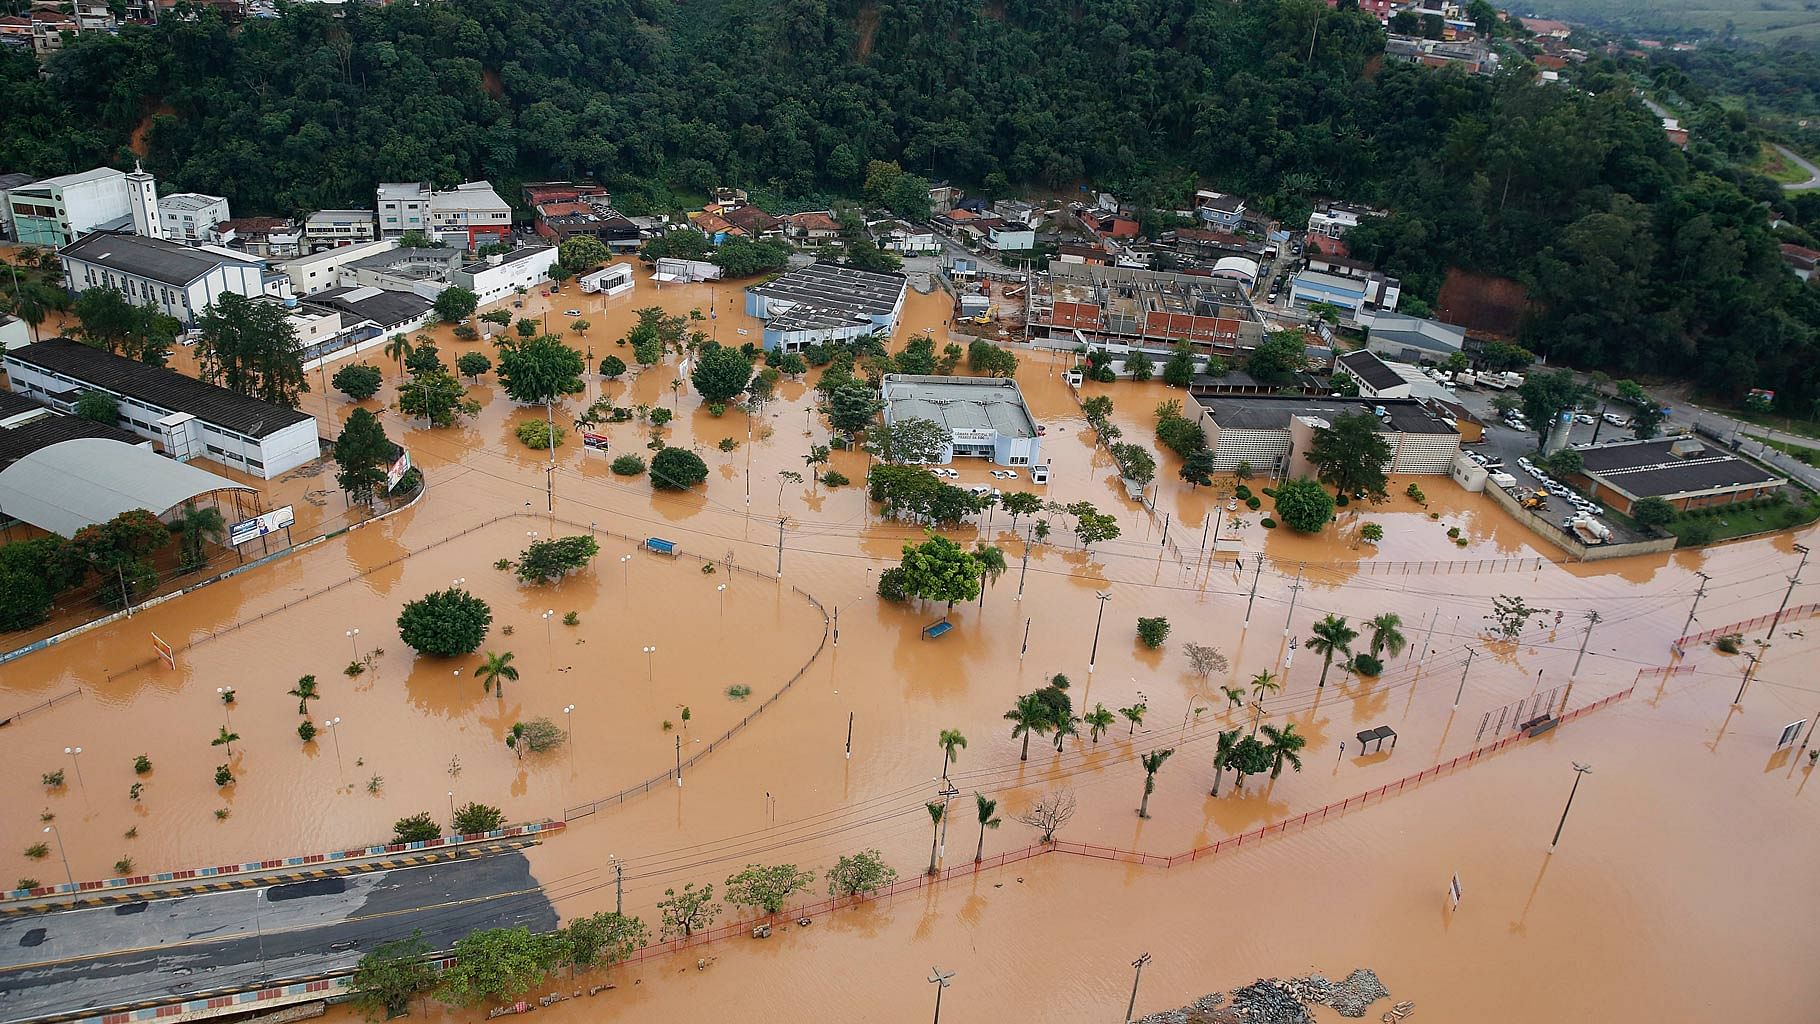 Towns in and around Sao Paulo were severely affected as well. (Photo: AP)